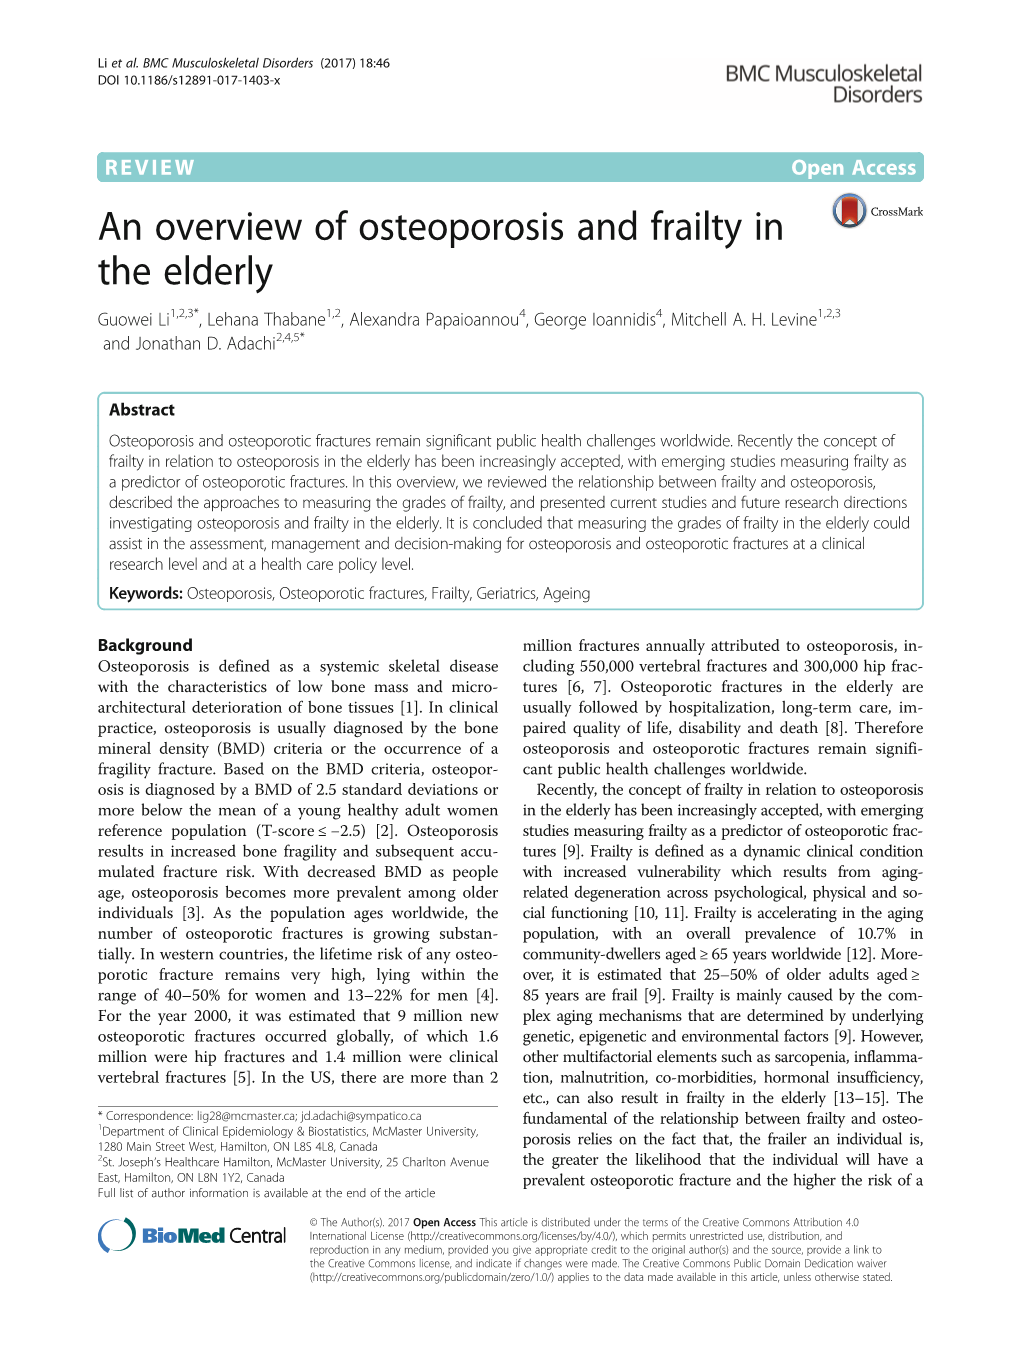 An Overview of Osteoporosis and Frailty in the Elderly Guowei Li1,2,3*, Lehana Thabane1,2, Alexandra Papaioannou4, George Ioannidis4, Mitchell A